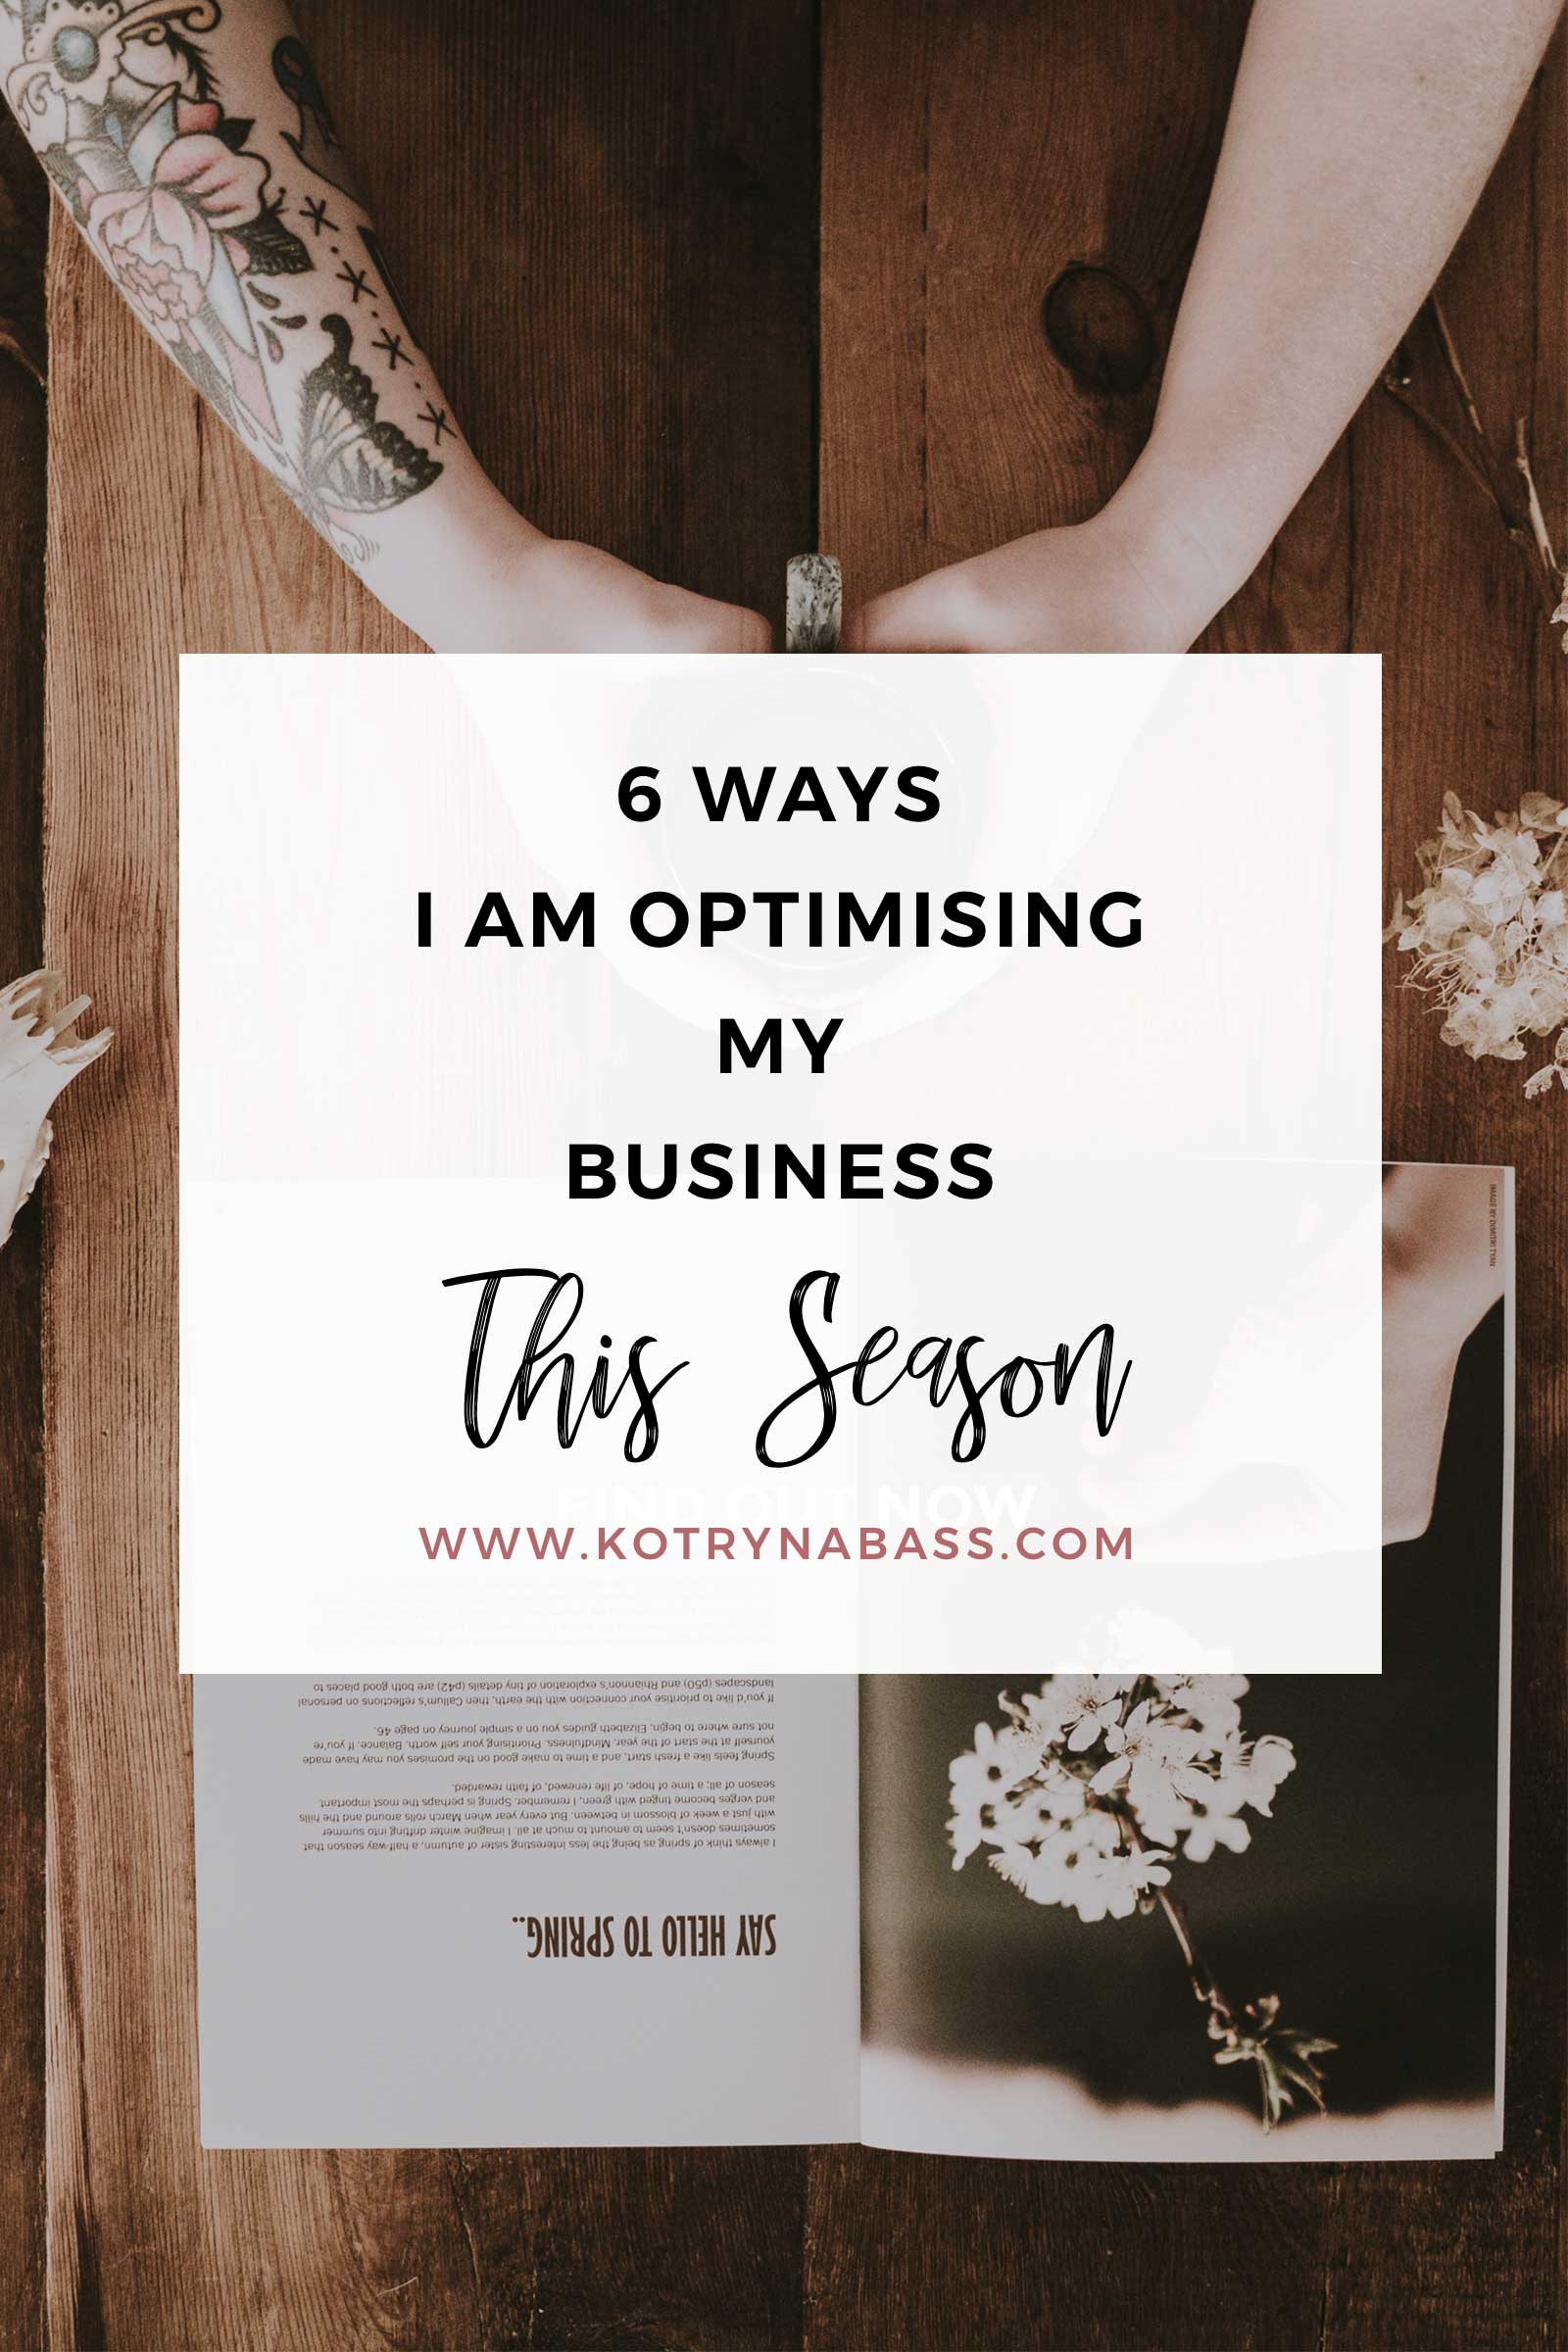 It's been around six years since I've first started my online business ventures & so much has changed. Not only my business grew significantly throughout the years, I'm now finally in the season where my number one goal is to optimize my business as much as possible, so I have more space for new opportunities in life. Wondering how am I optimizing my business this season? Keep on reading...